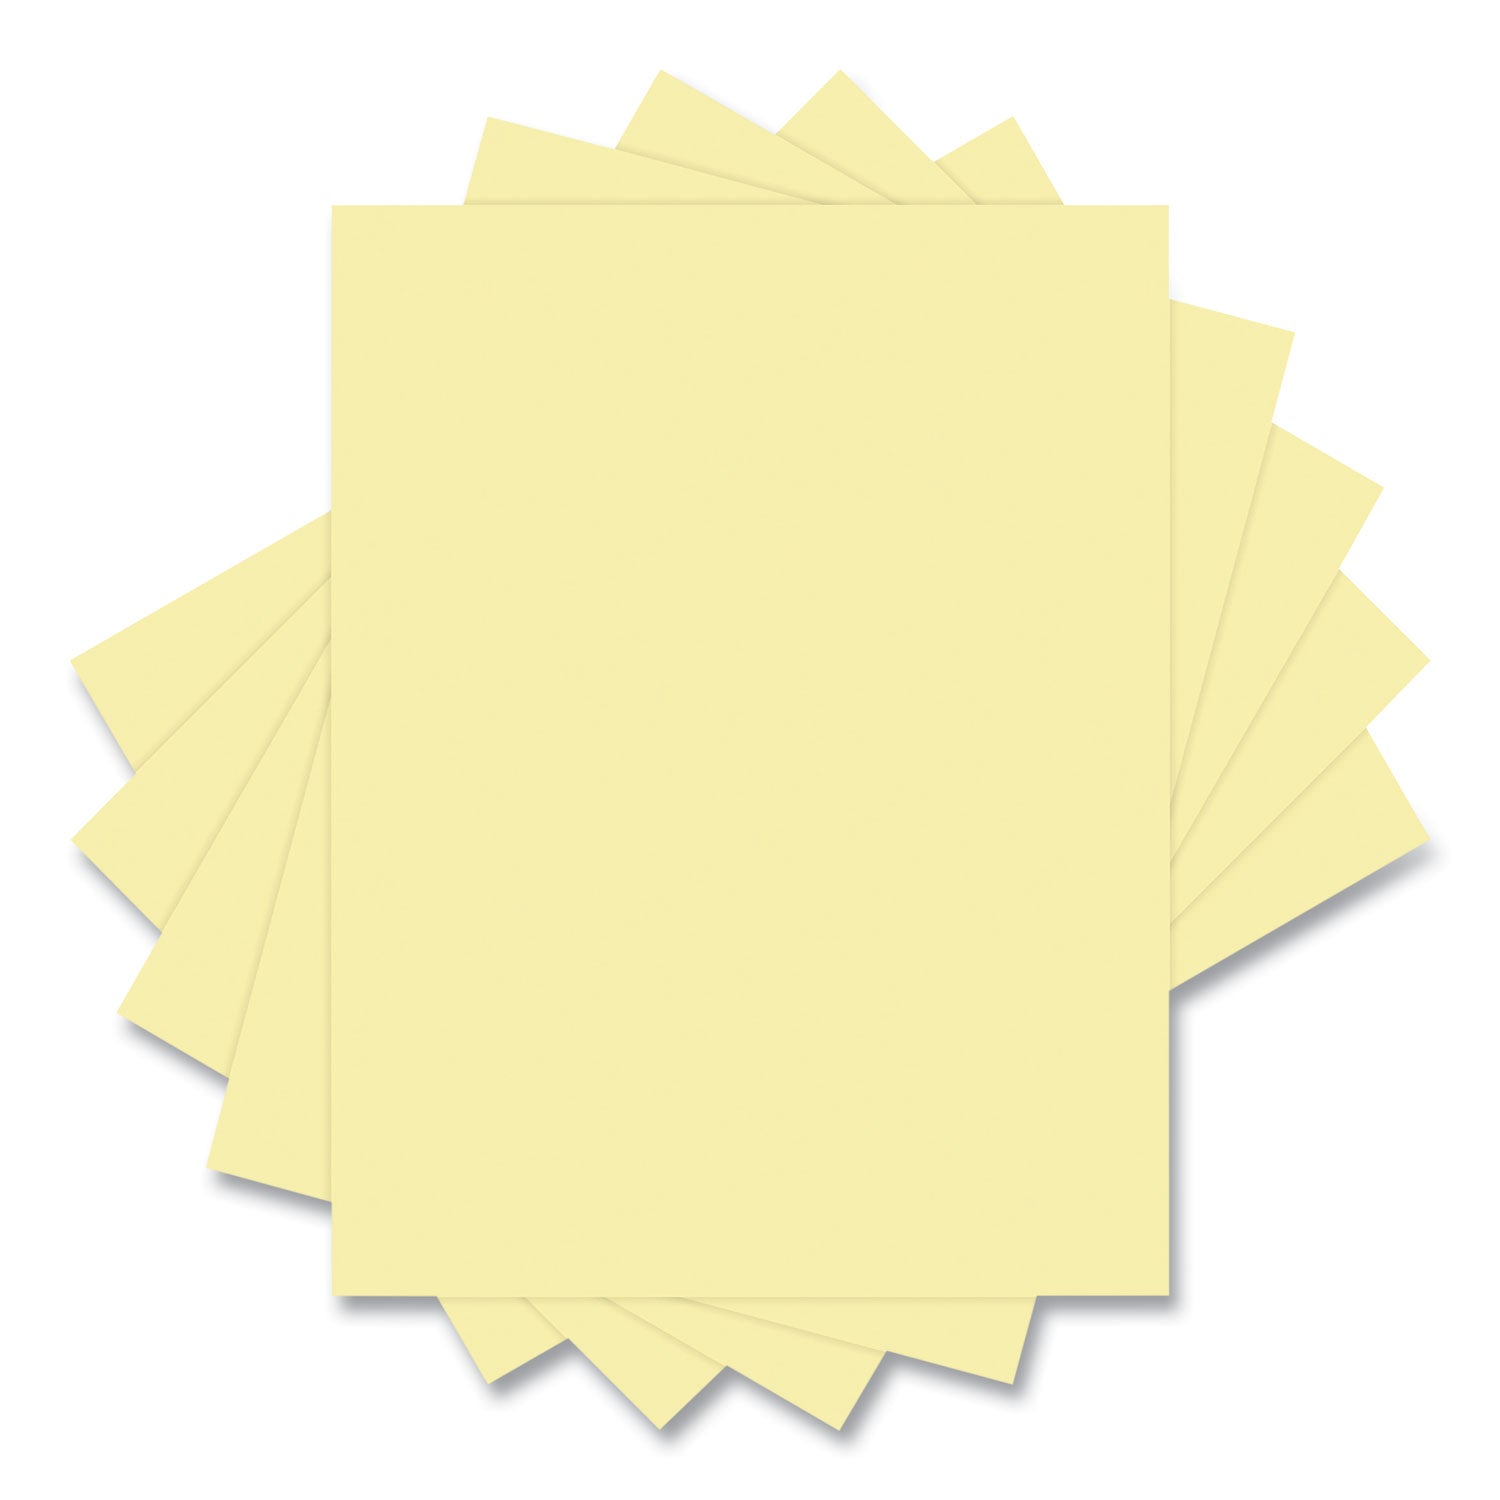 30%-recycled-colored-paper-20-lb-bond-weight-85-x-11-canary-500-ream_dmr94290 - 2